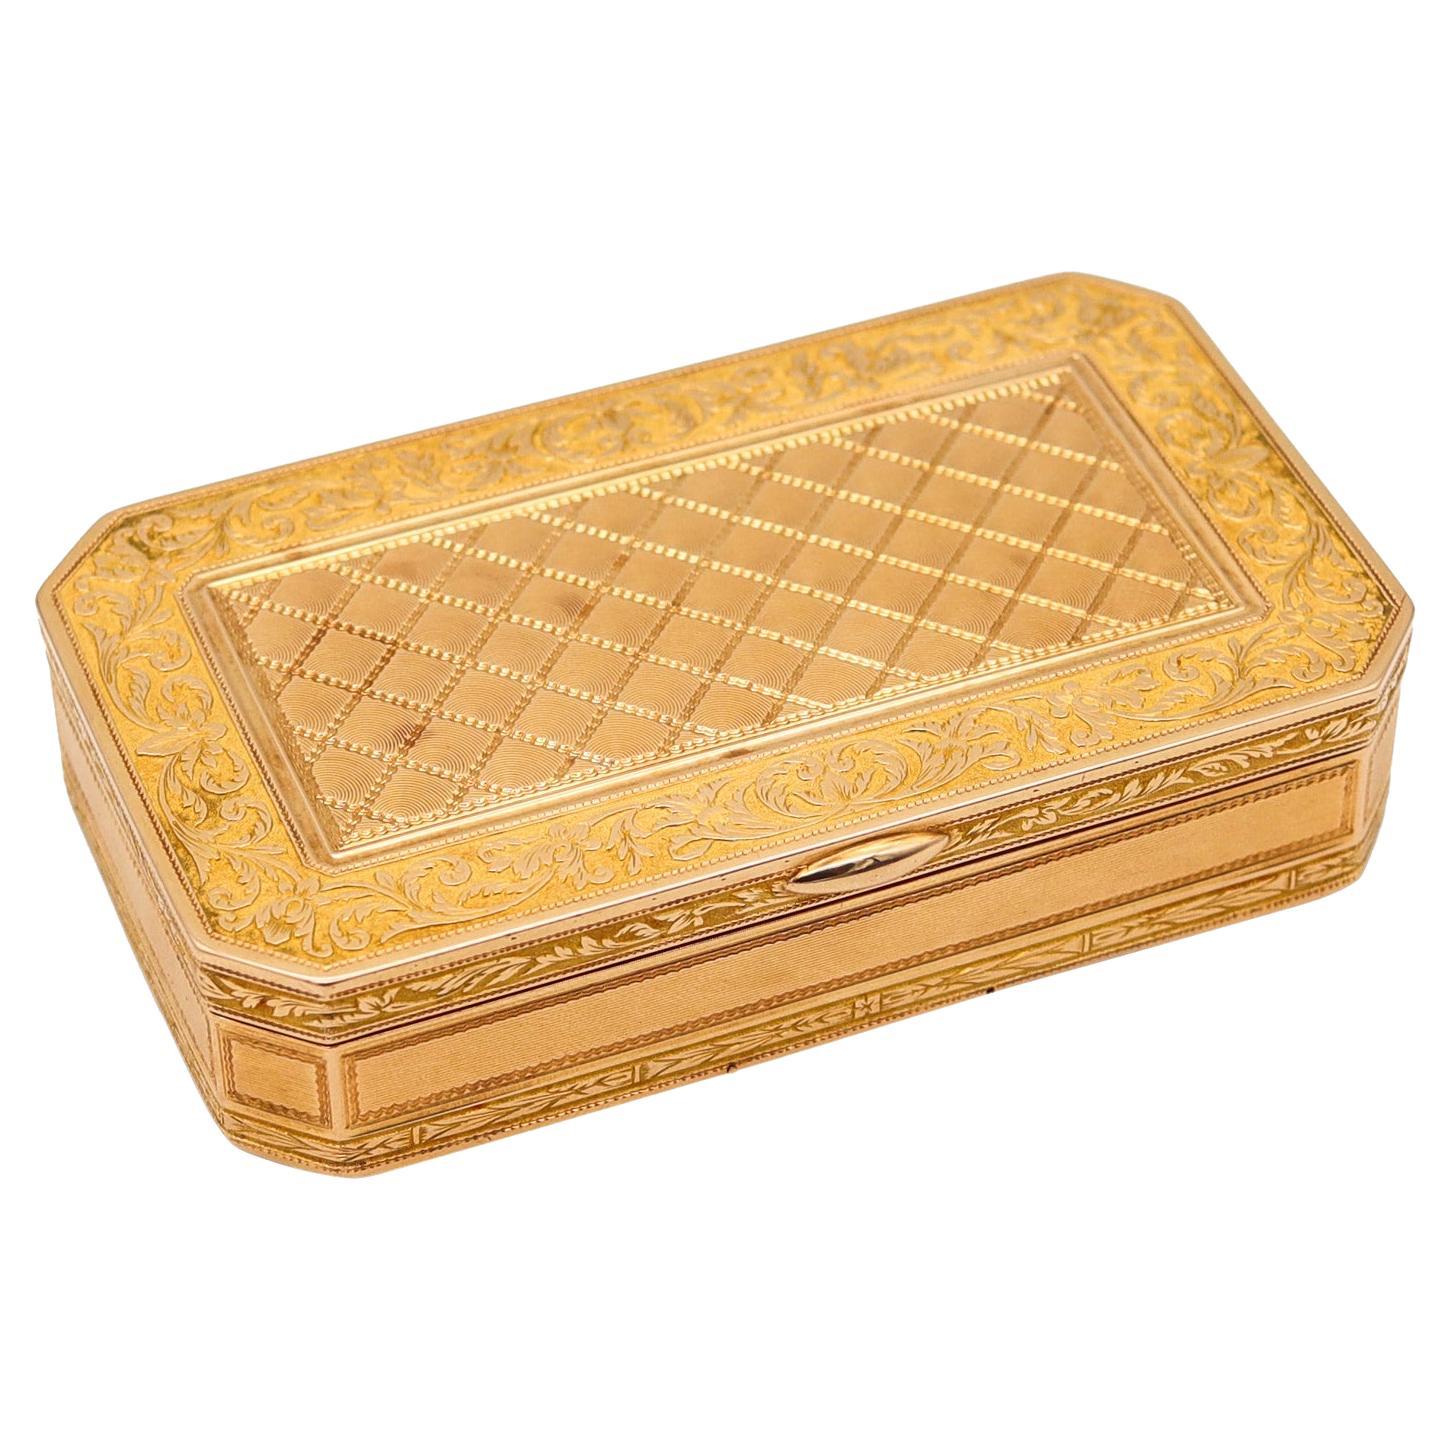 French 1819-1838 Neoclassical Louis XVI Rectangular Snuff Box Labrated 18kt Gold For Sale